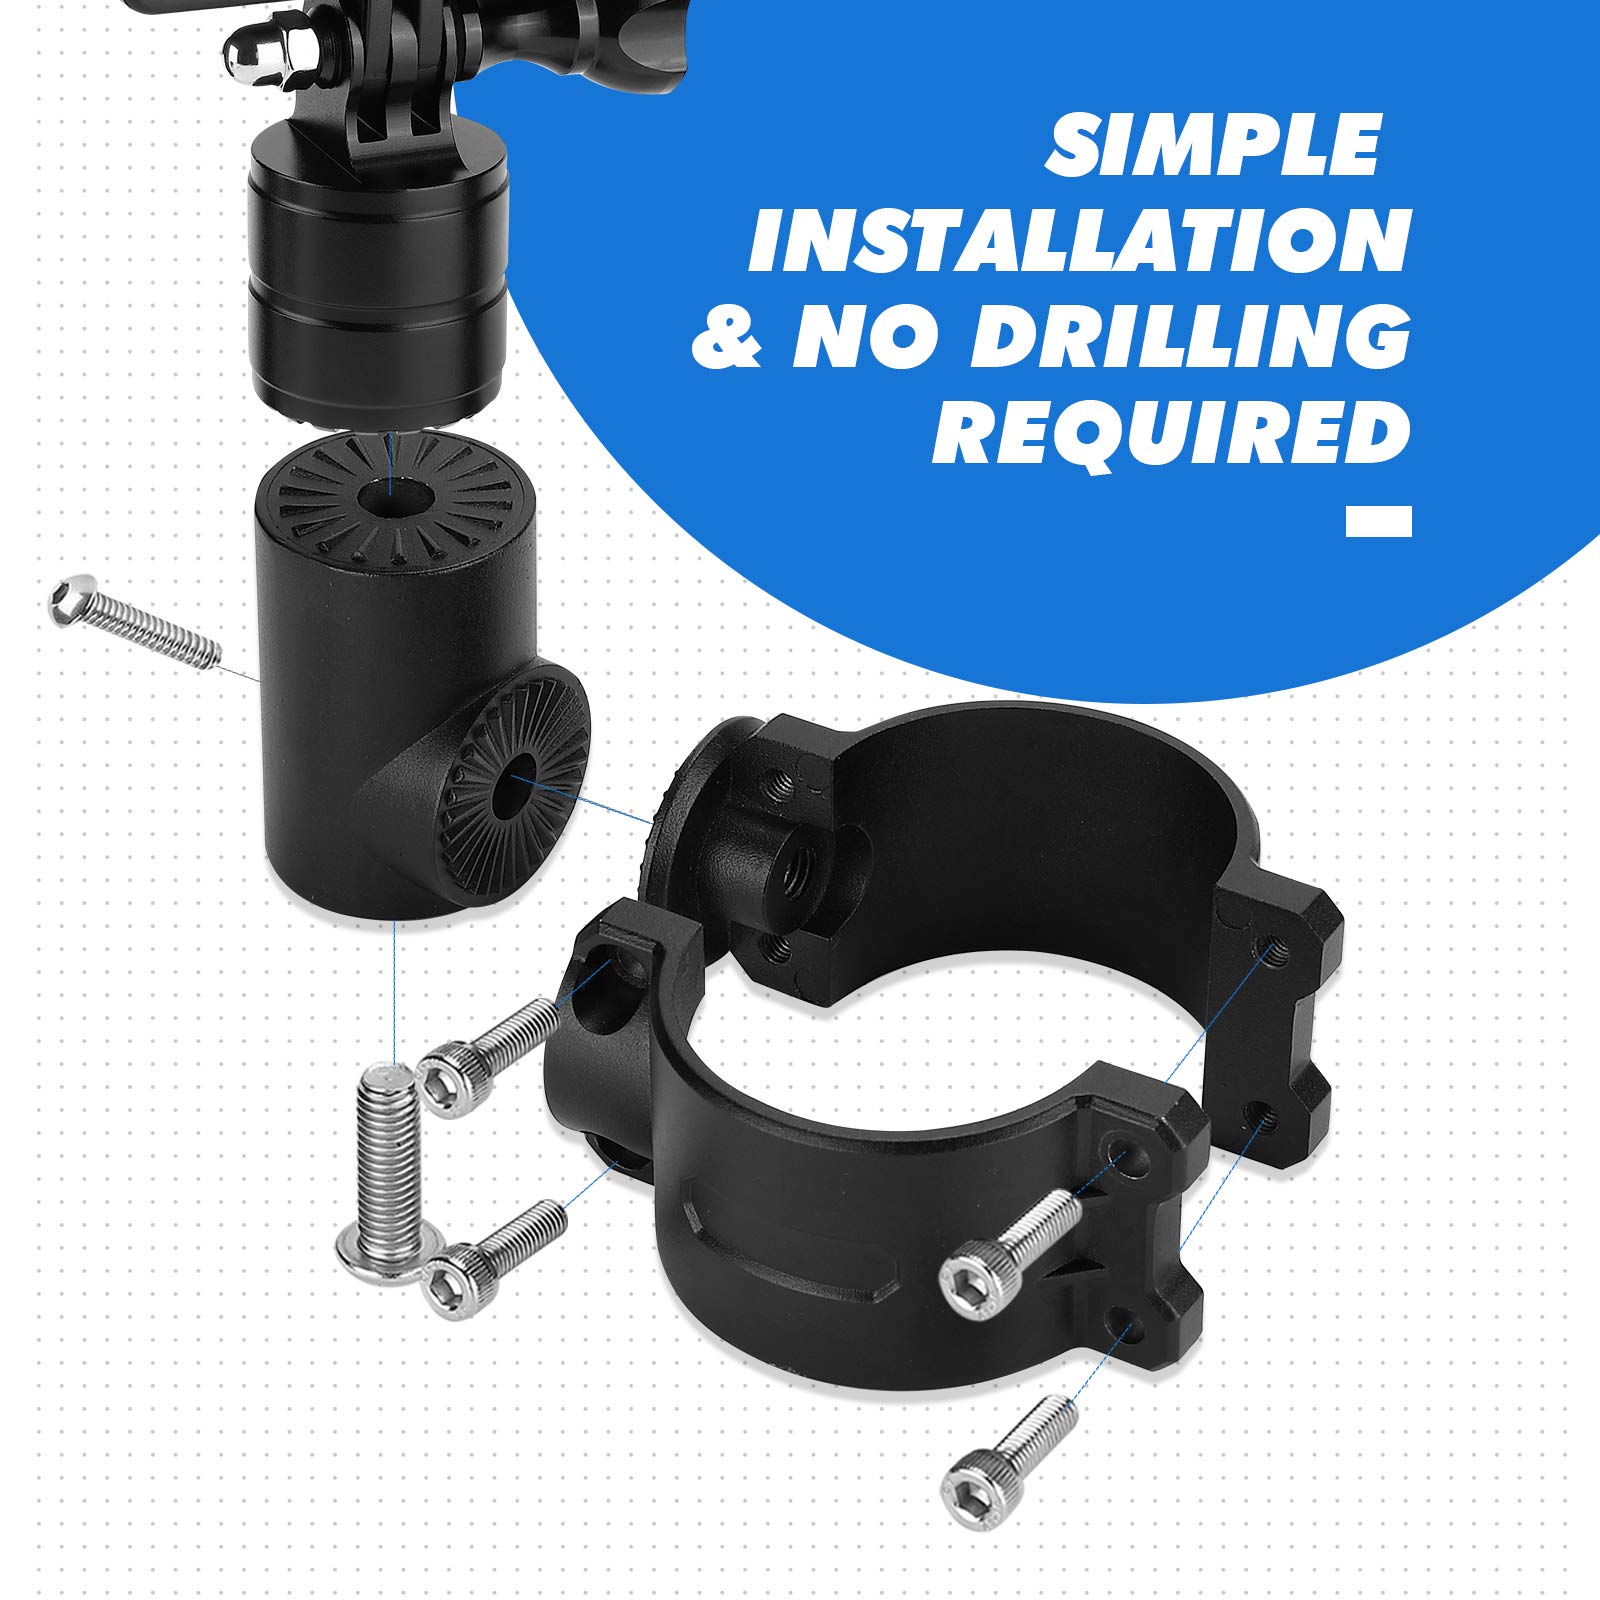 Go Pro Camera Holder Suitable for 1.75-2 inch roll bar - Kemimoto